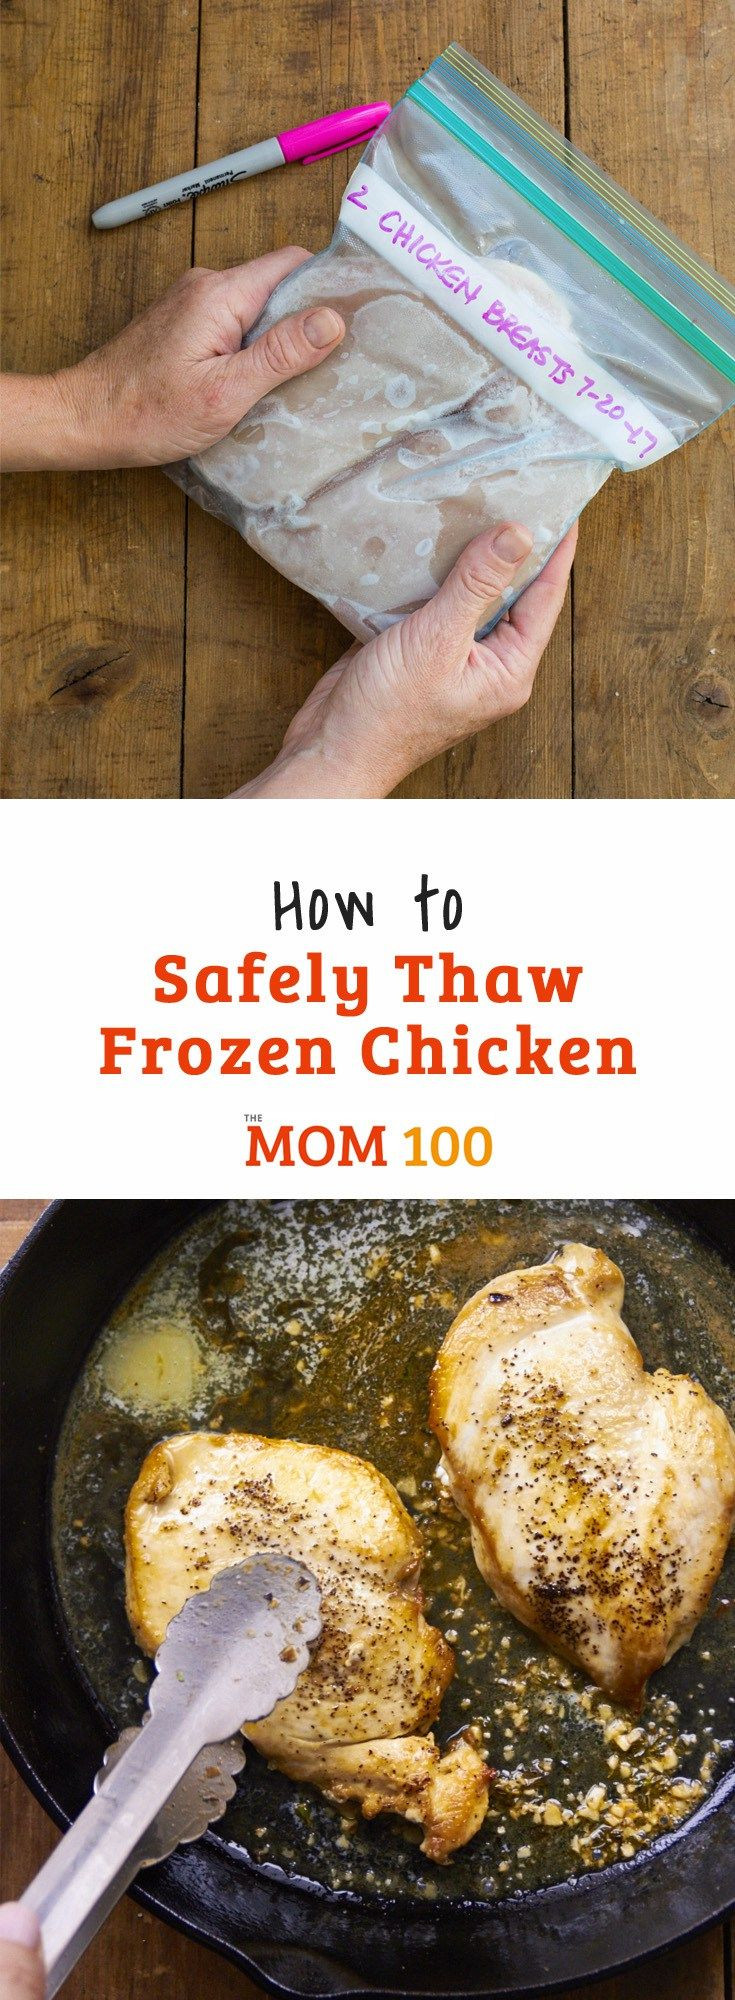 Defrost Chicken Thighs In Microwave
 How to Safely Thaw Frozen Chicken